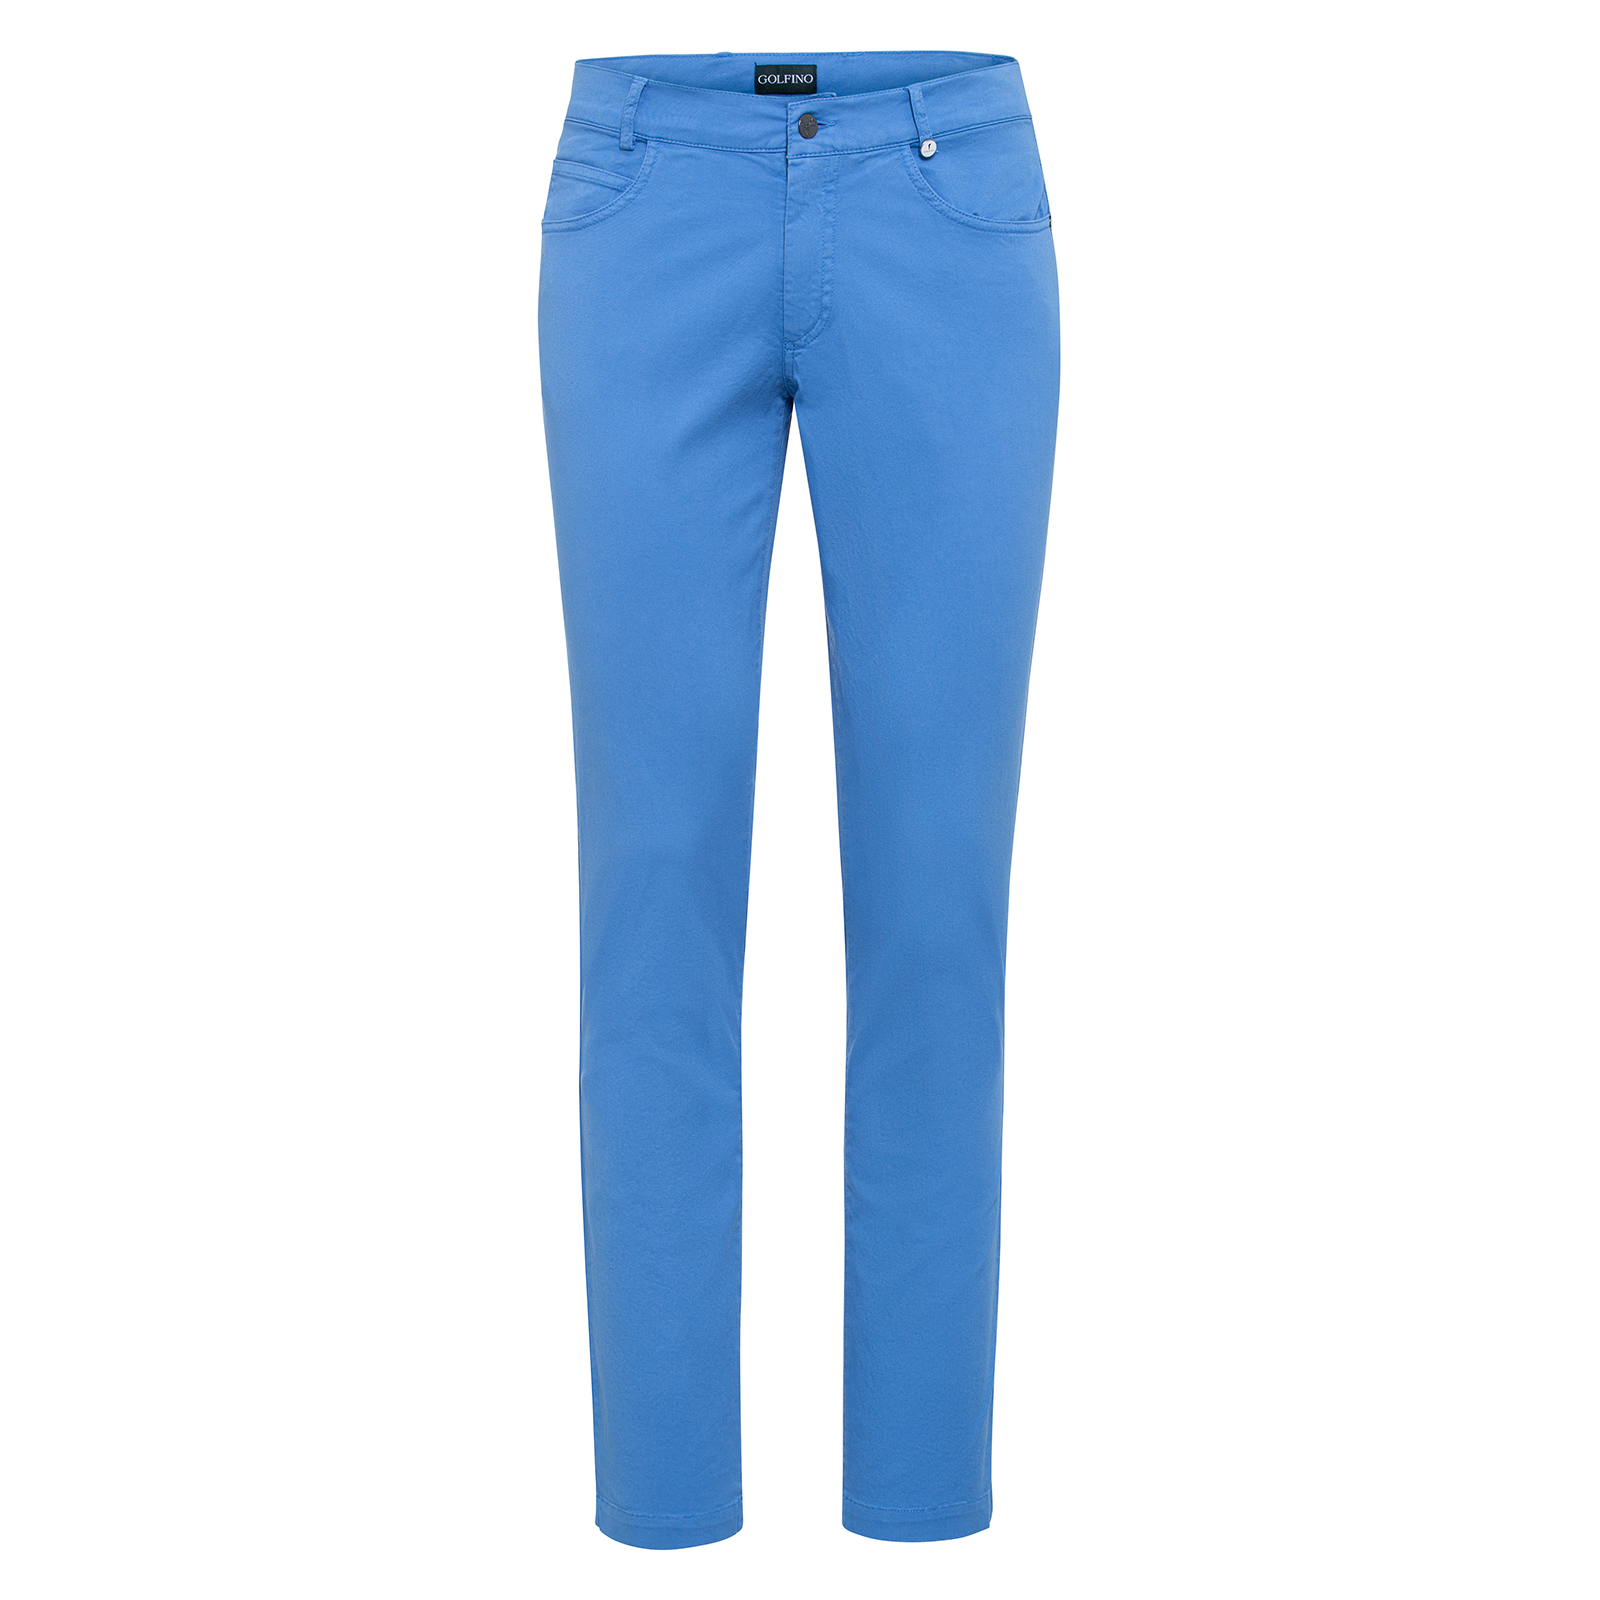 Men's Casual Cotton Trousers in Extra Slim Fit